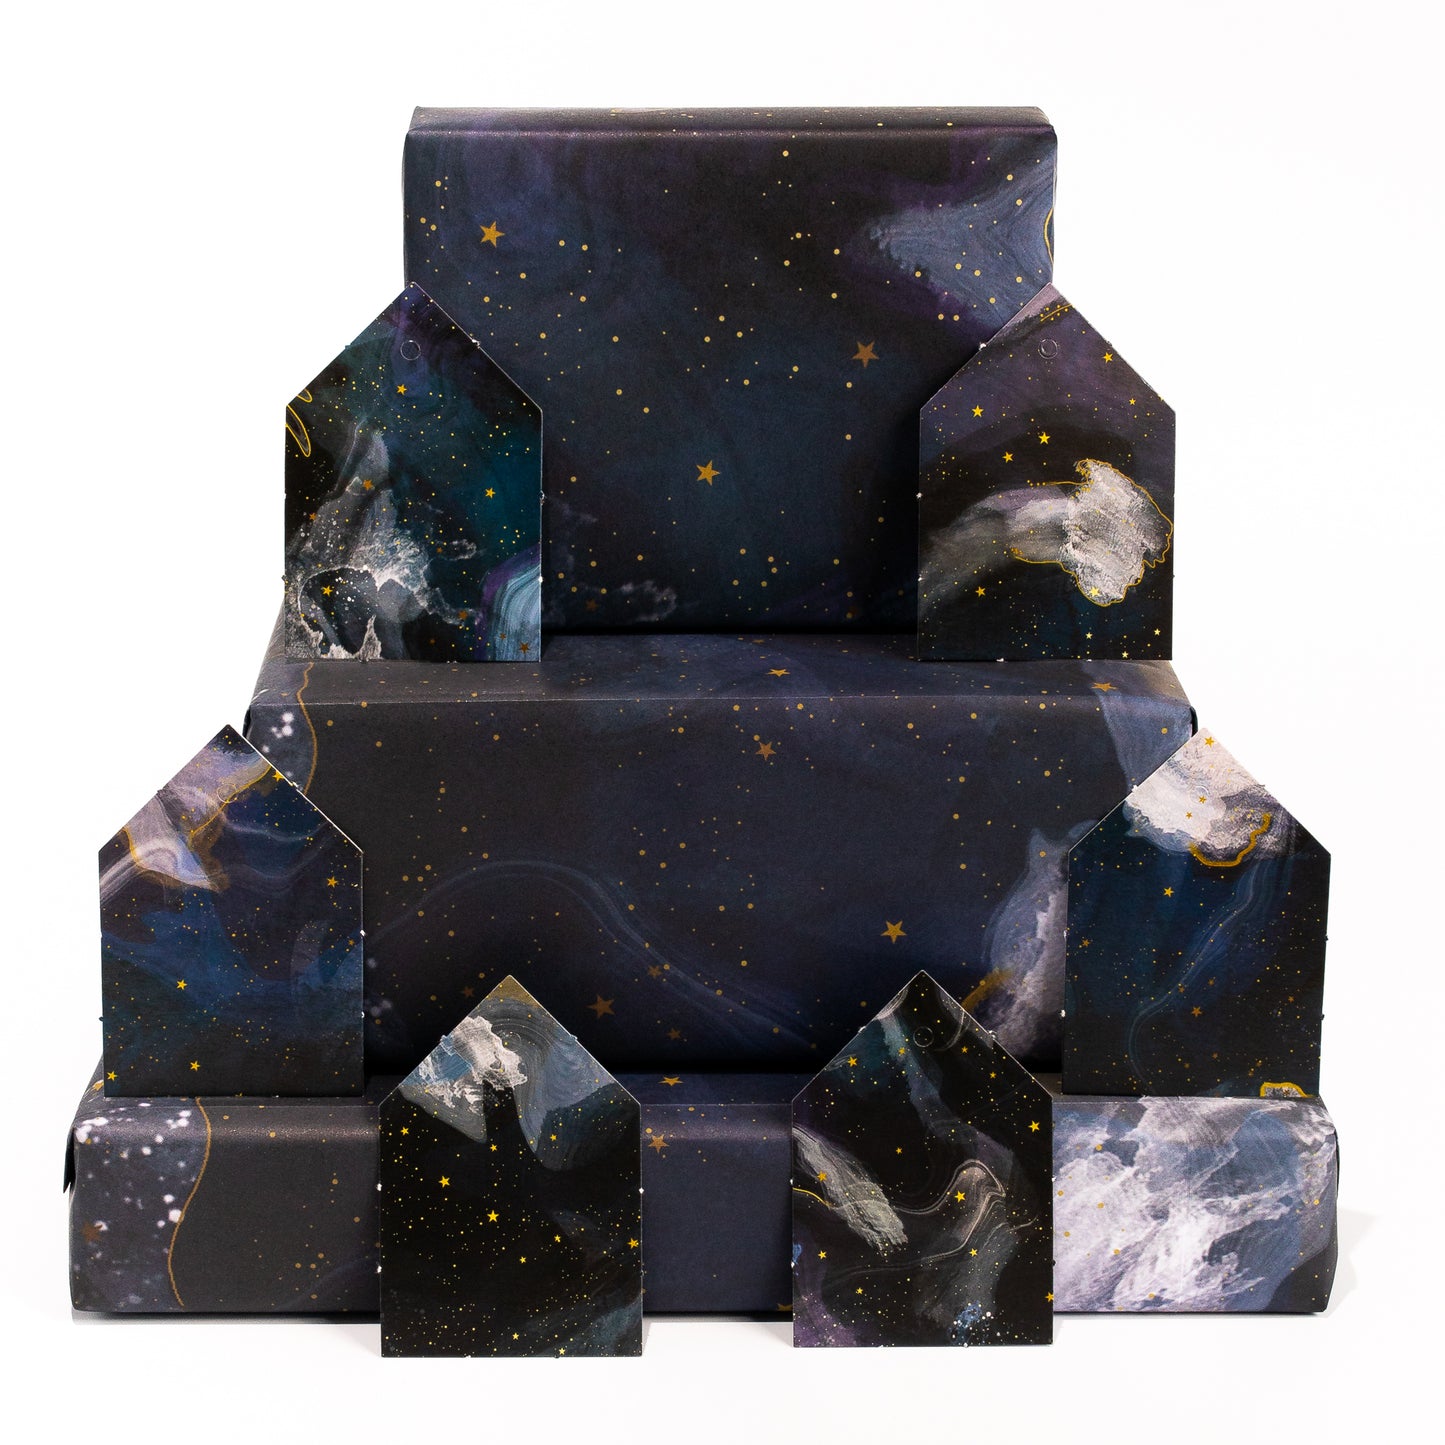 Galaxy Wrapping Paper - 6 Sheets of Gift Wrap - 'Watercolour Sky' - Black Gift Wrap - For Men Women Him Her Boys Girls